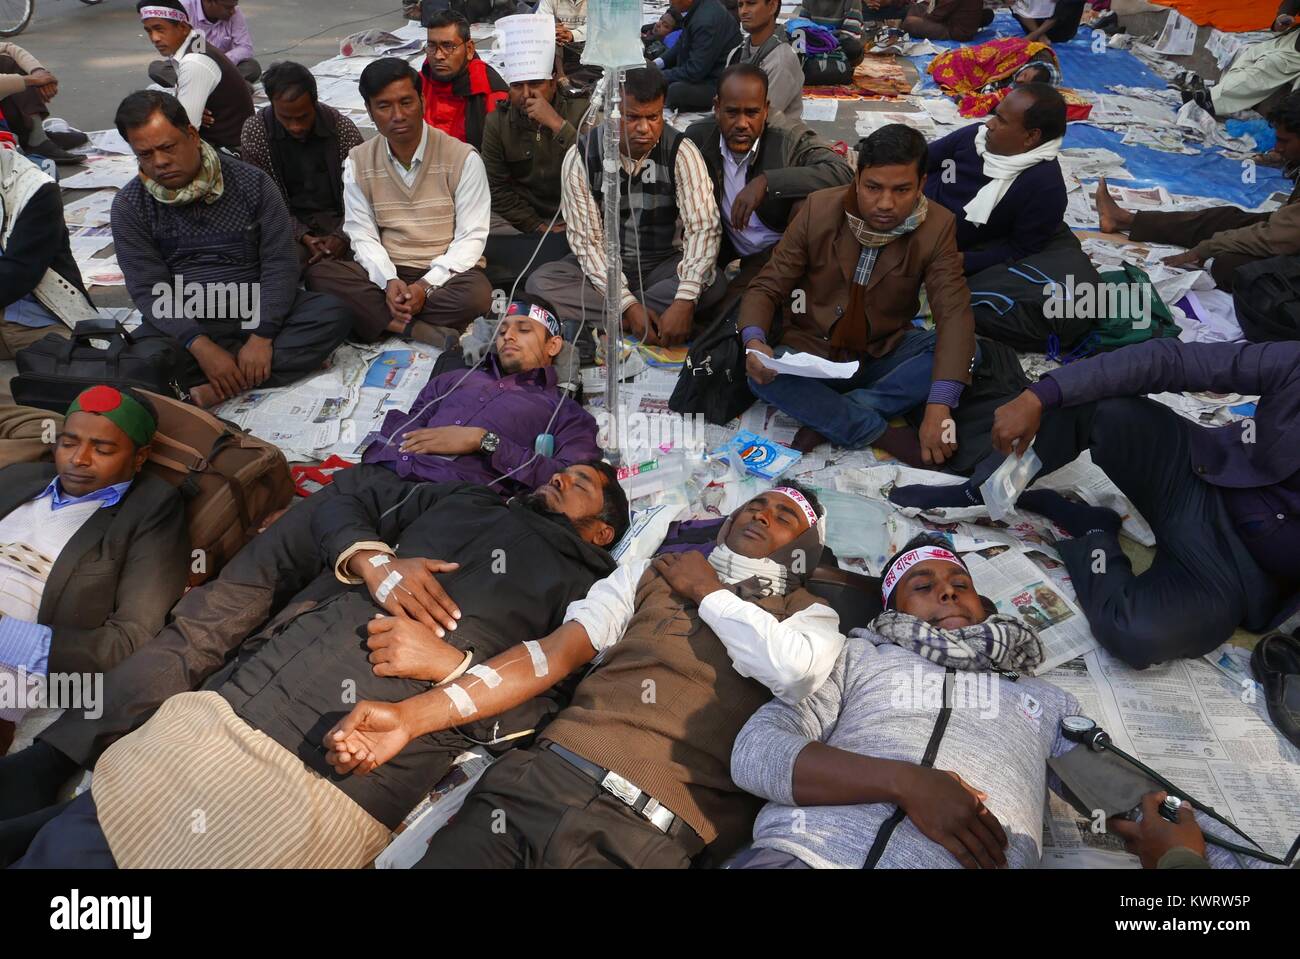 Dhaka, Bangladesh. 5th Jan, 2018. Non-MPO (monthly pay order) teachers from different non-government institutions, lay down as in the street as they continue the five day of their fast unto death hunger strike program in front of the National Press Club in Dhaka, Bangladesh. Some hundred teachers went for hunger strike demanding their inclusion of the government-approved educational MPO facilities while more than 80,000 teachers from 5,242 non-MPO institutions are working without any pay, according to the leaders. © Monirul Alam Credit: Monirul Alam/ZUMA Wire/Alamy Live News Stock Photo